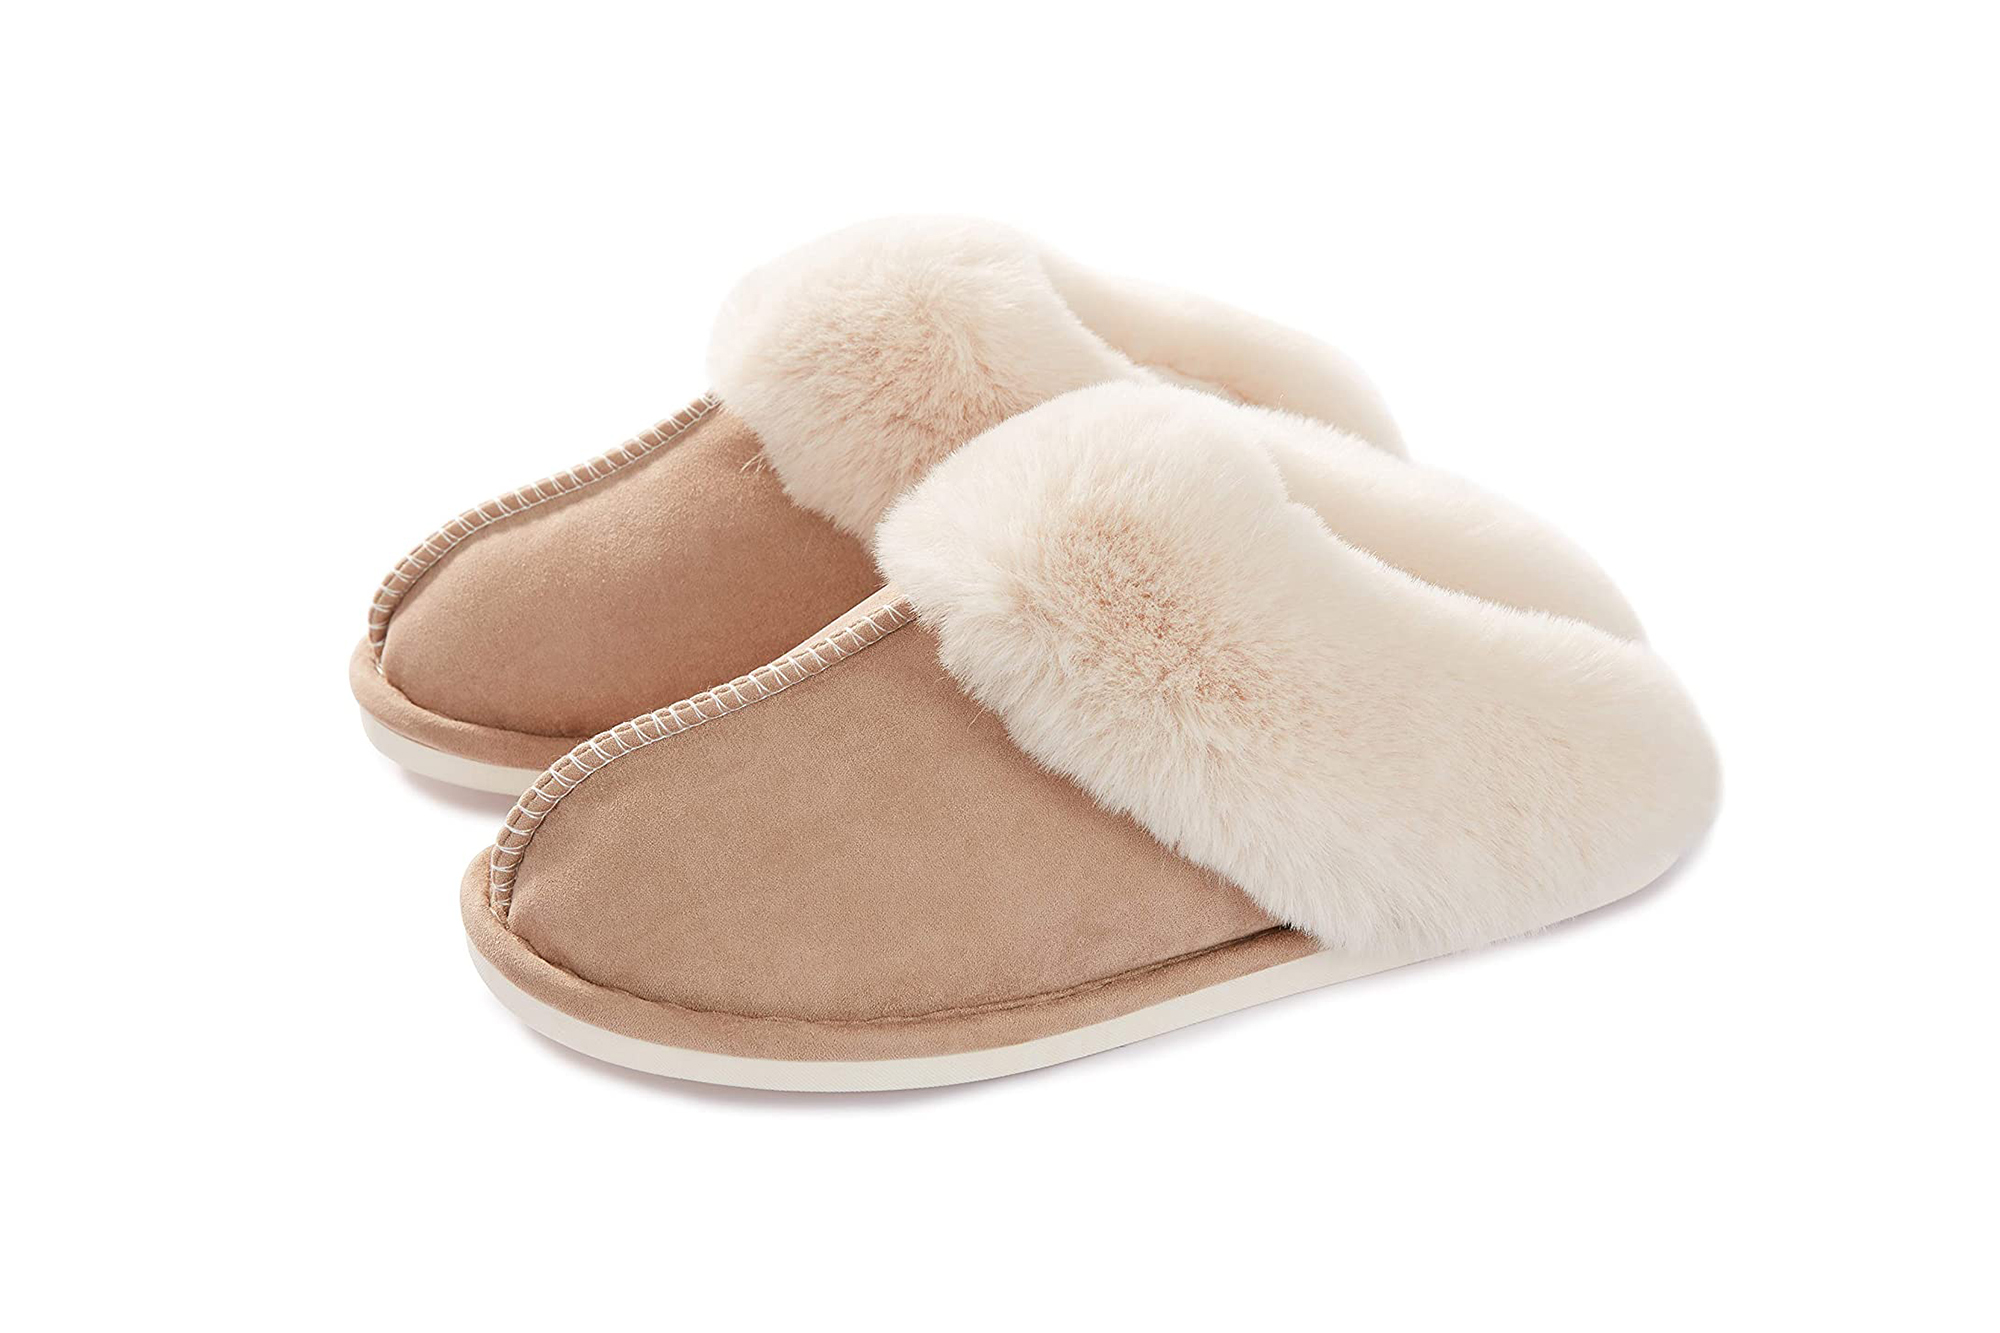 Topsale Bathroom furry soft slippers, authentic quality, non slippery, wind  cheater, best in budget, velvet fabric, indoor footwears : Amazon.in: Shoes  & Handbags